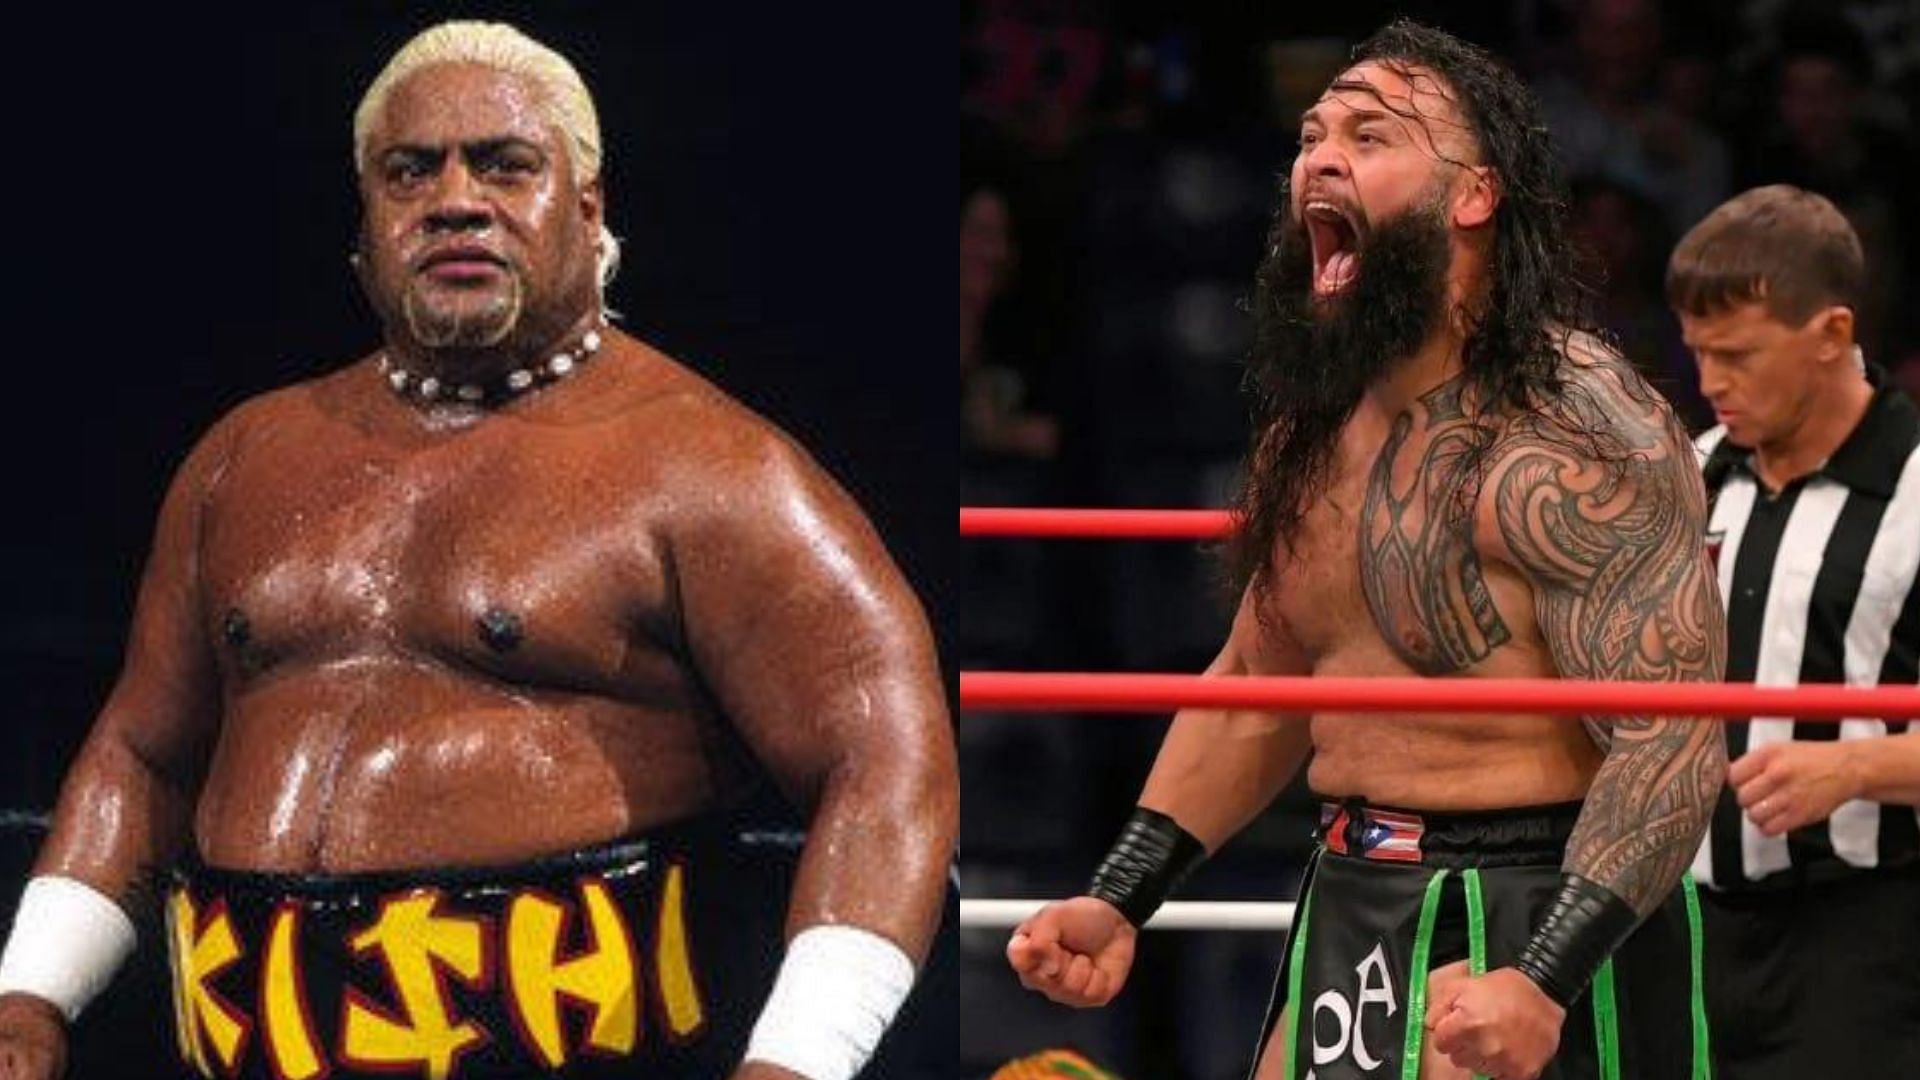 Rikishi (left) sent a message to a current AEW star